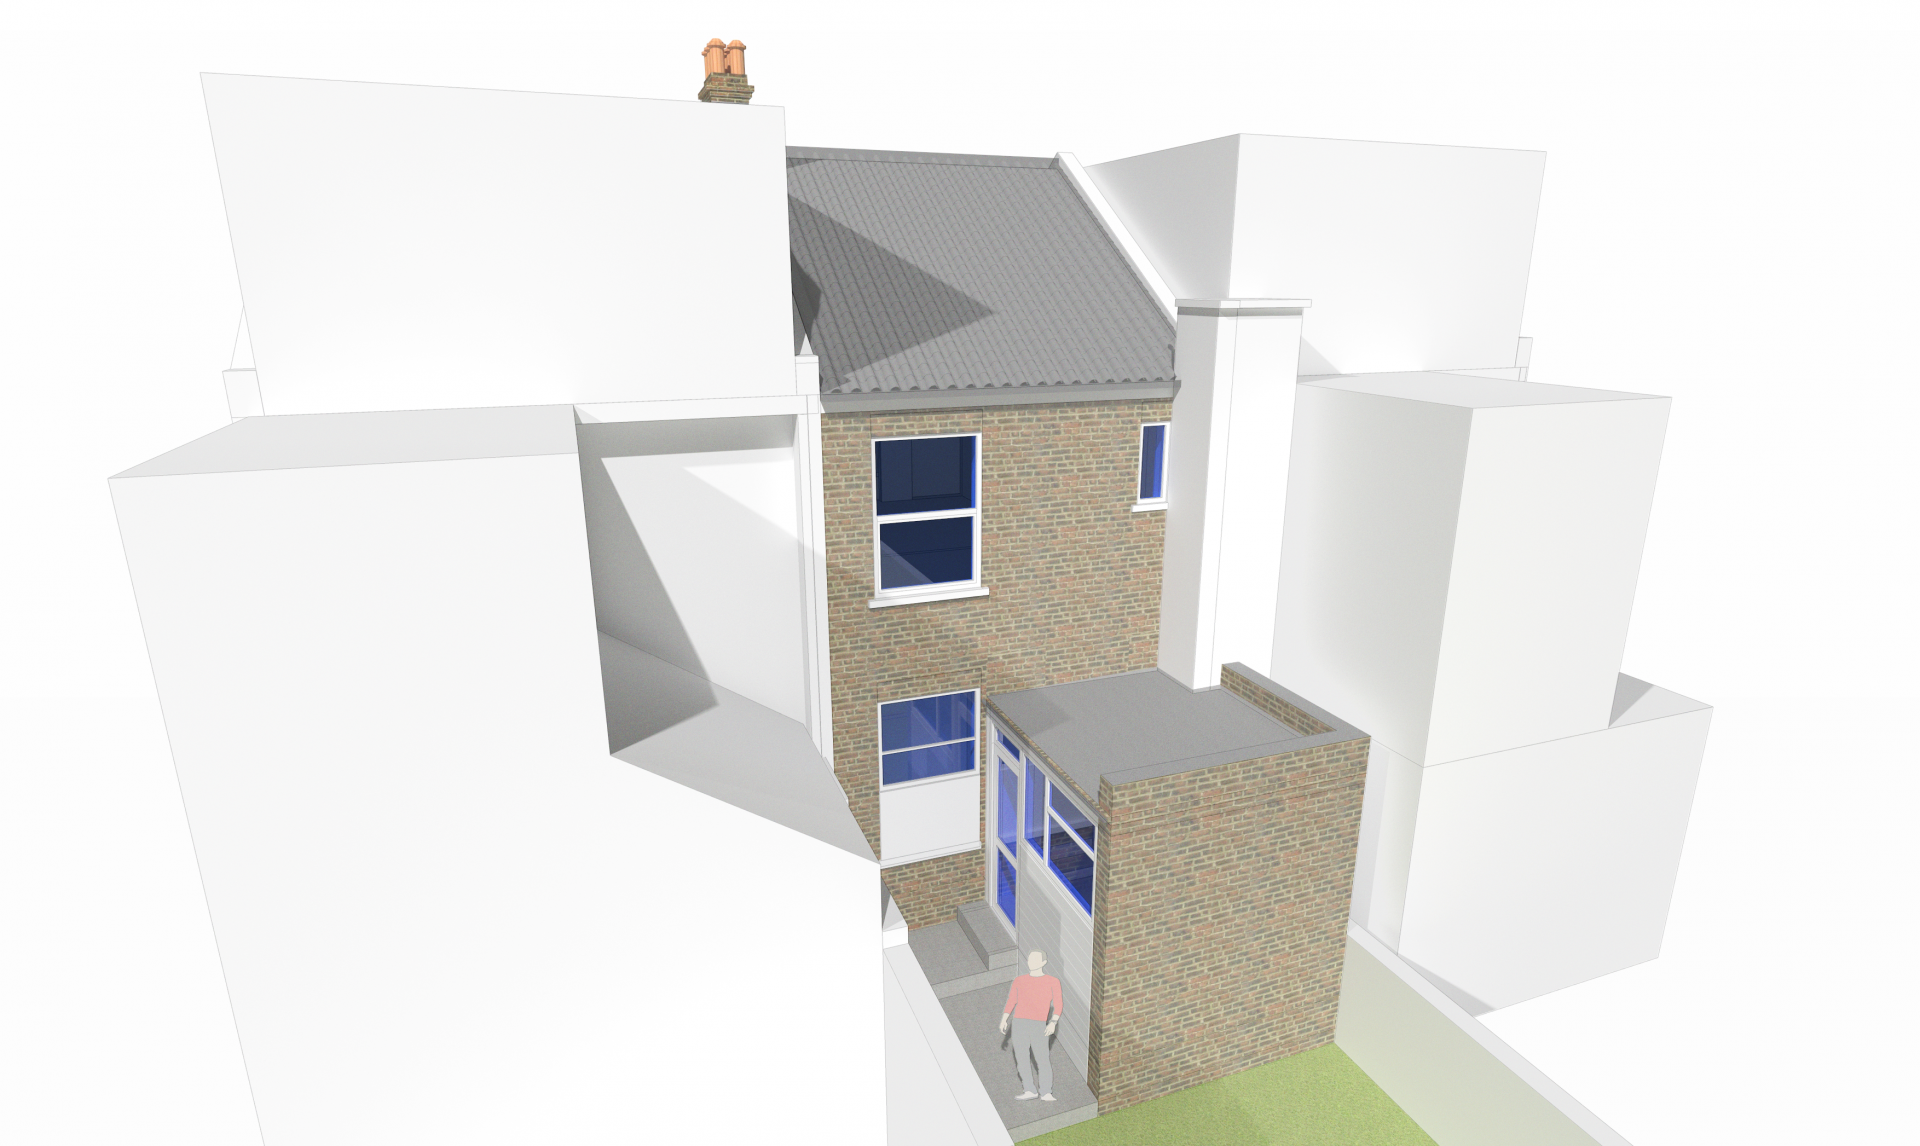 An image showing a 3D model of an infill project in Brighton